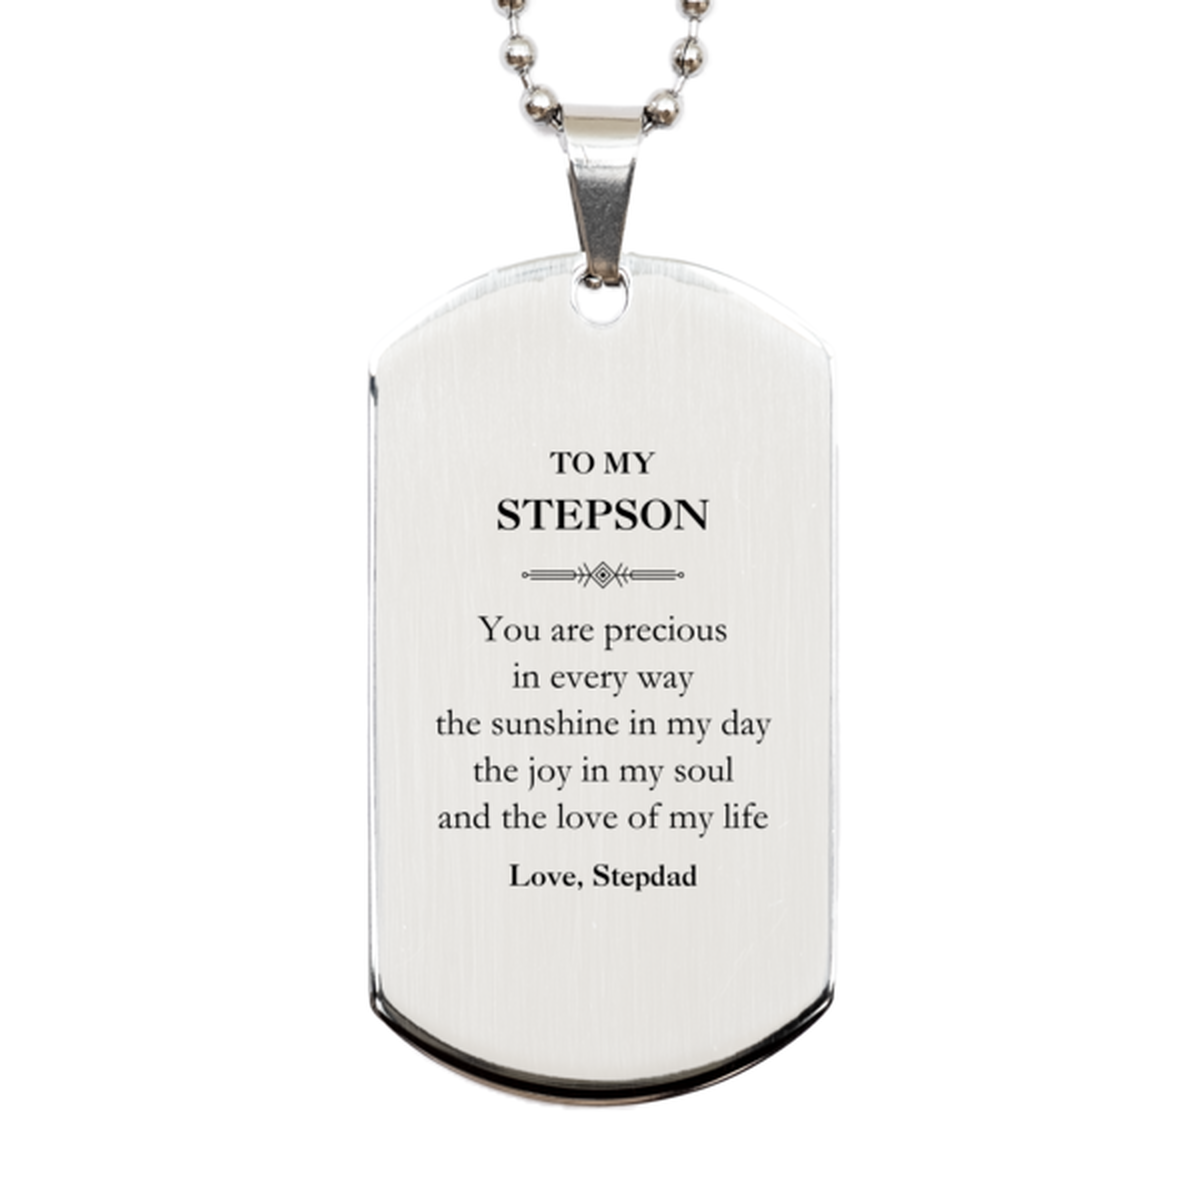 Graduation Gifts for Stepson Silver Dog Tag Present from Stepdad, Christmas Stepson Birthday Gifts Stepson You are precious in every way the sunshine in my day. Love, Stepdad